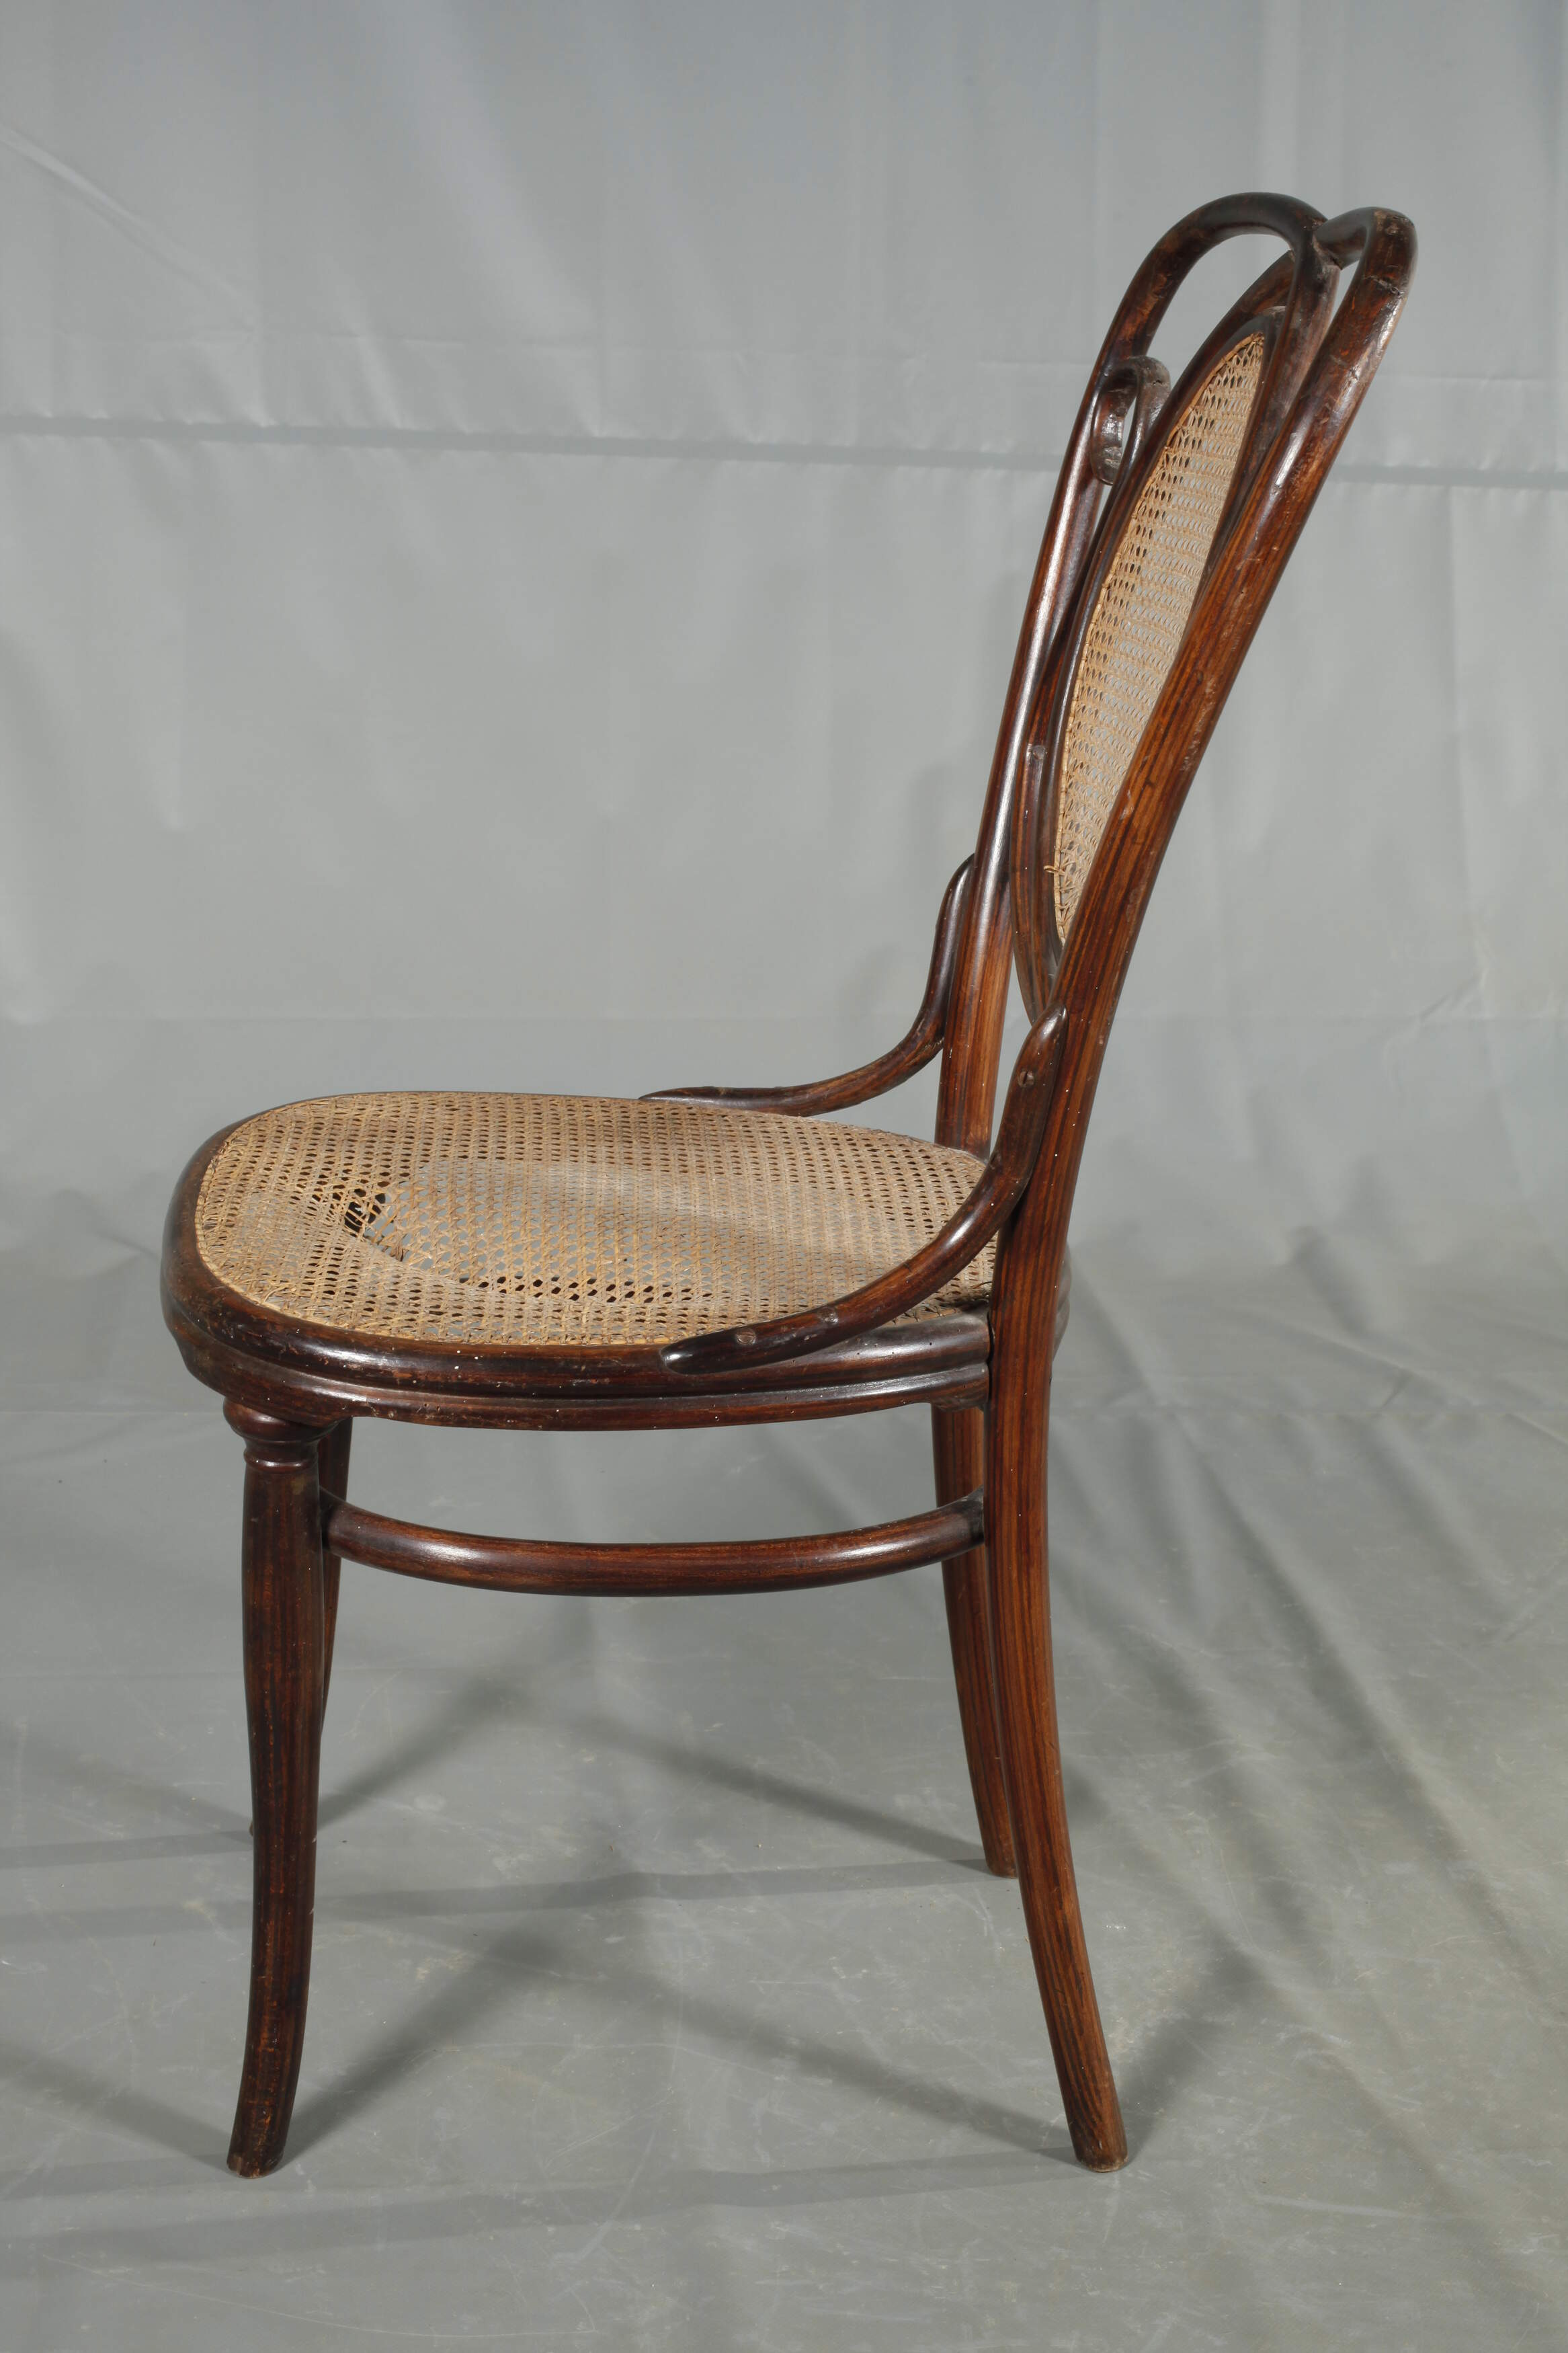 Early Thonet chair, model no. 22 - Image 4 of 6